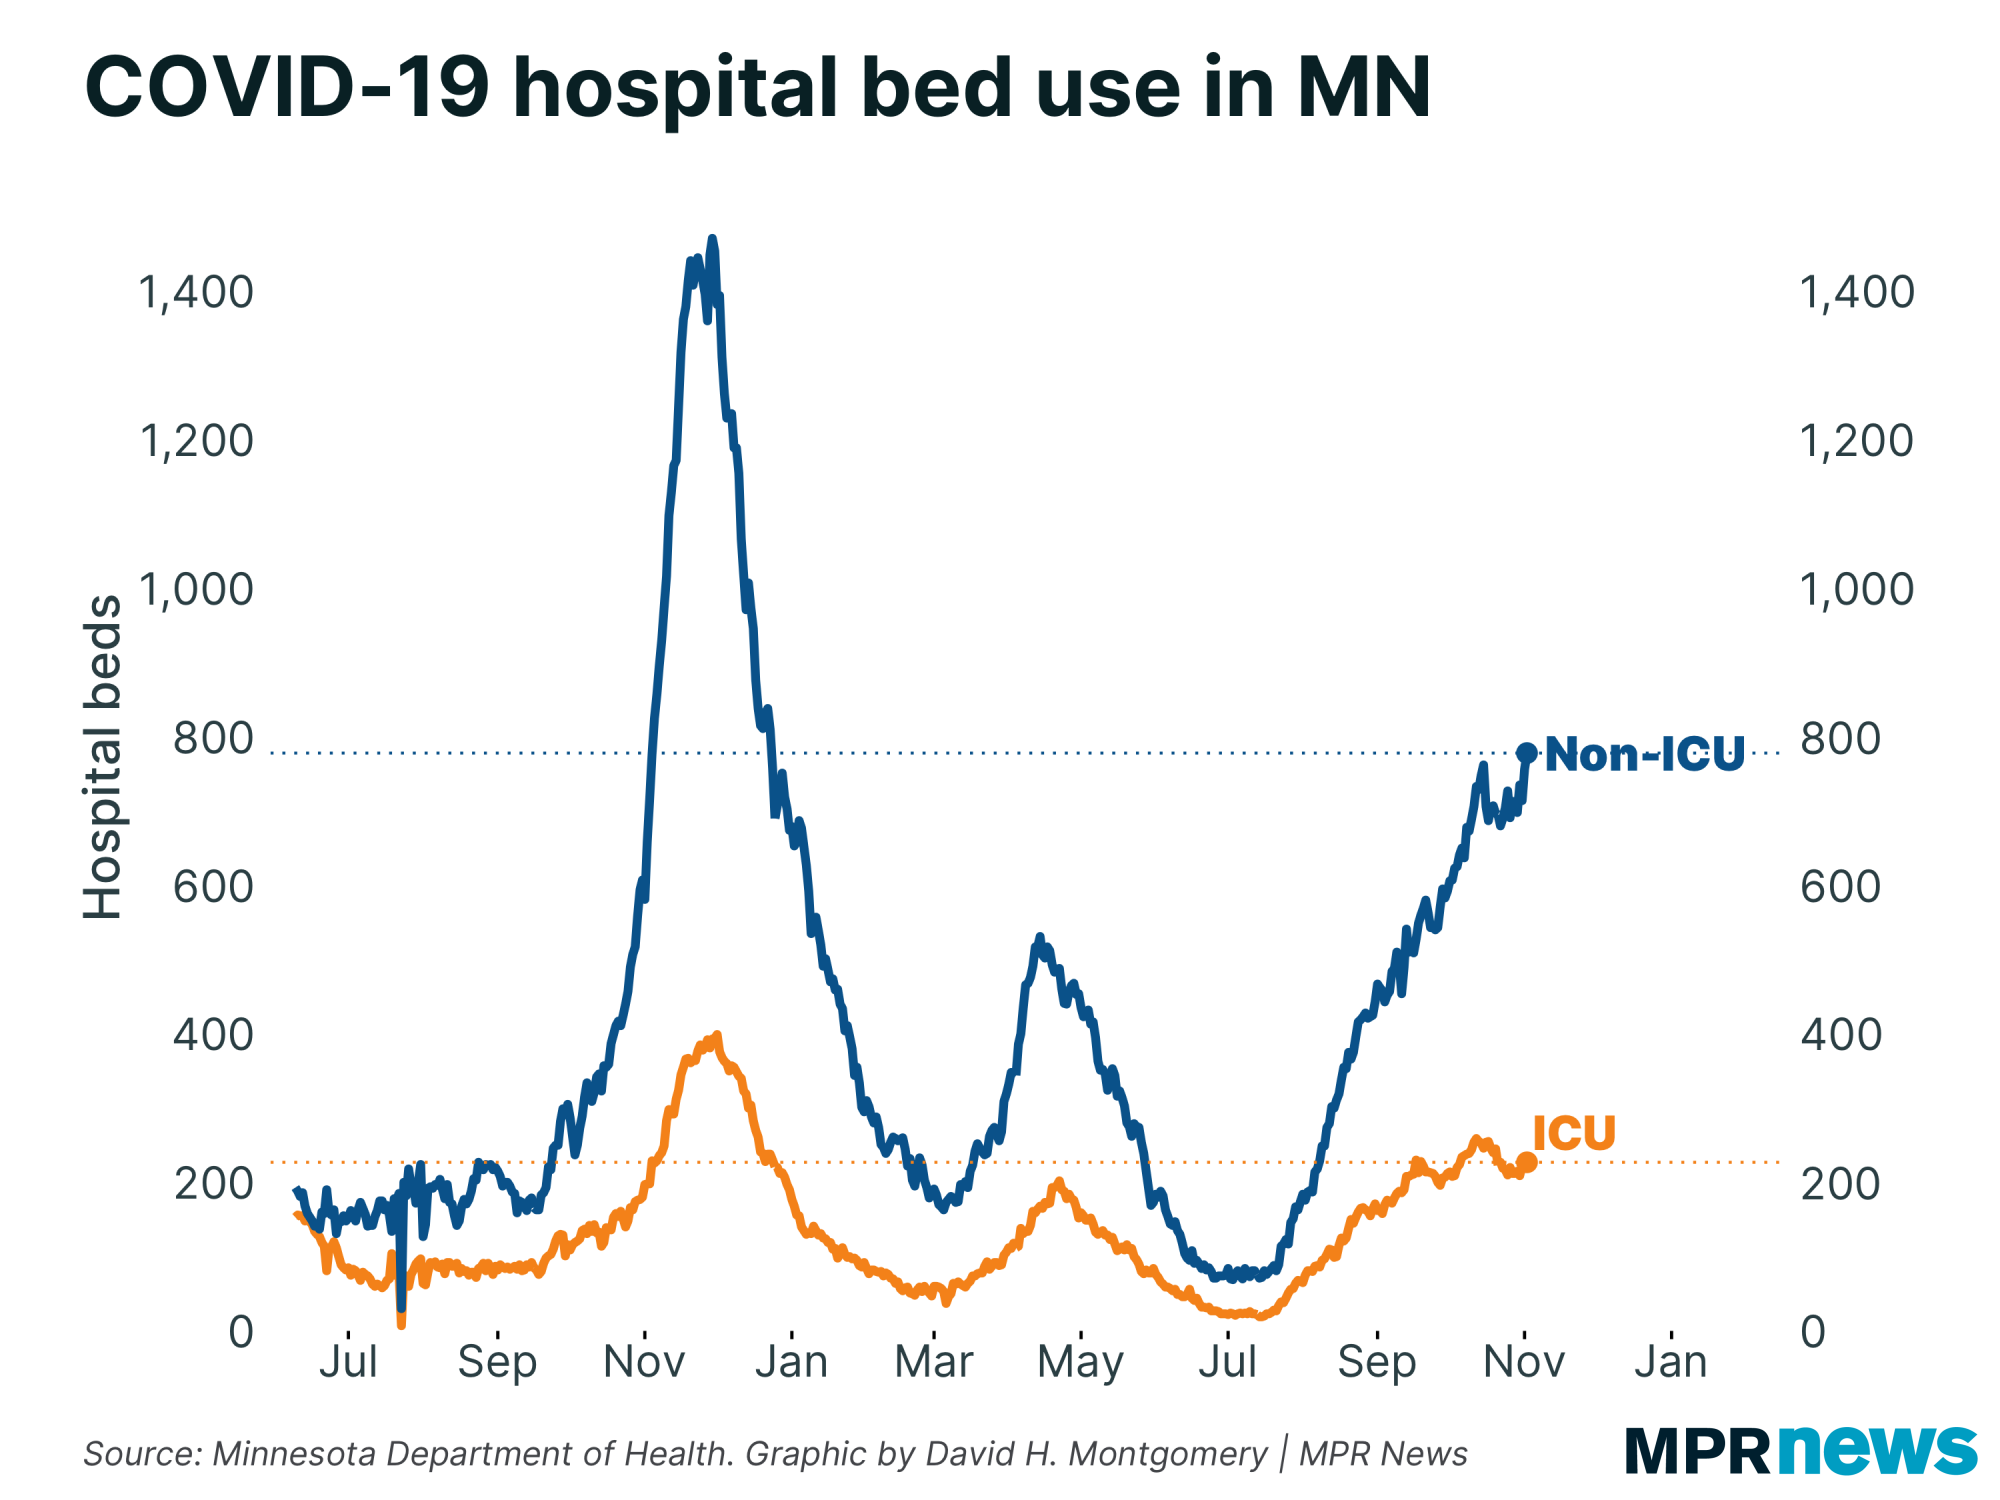 Graph of COVID-19 hospital bed use